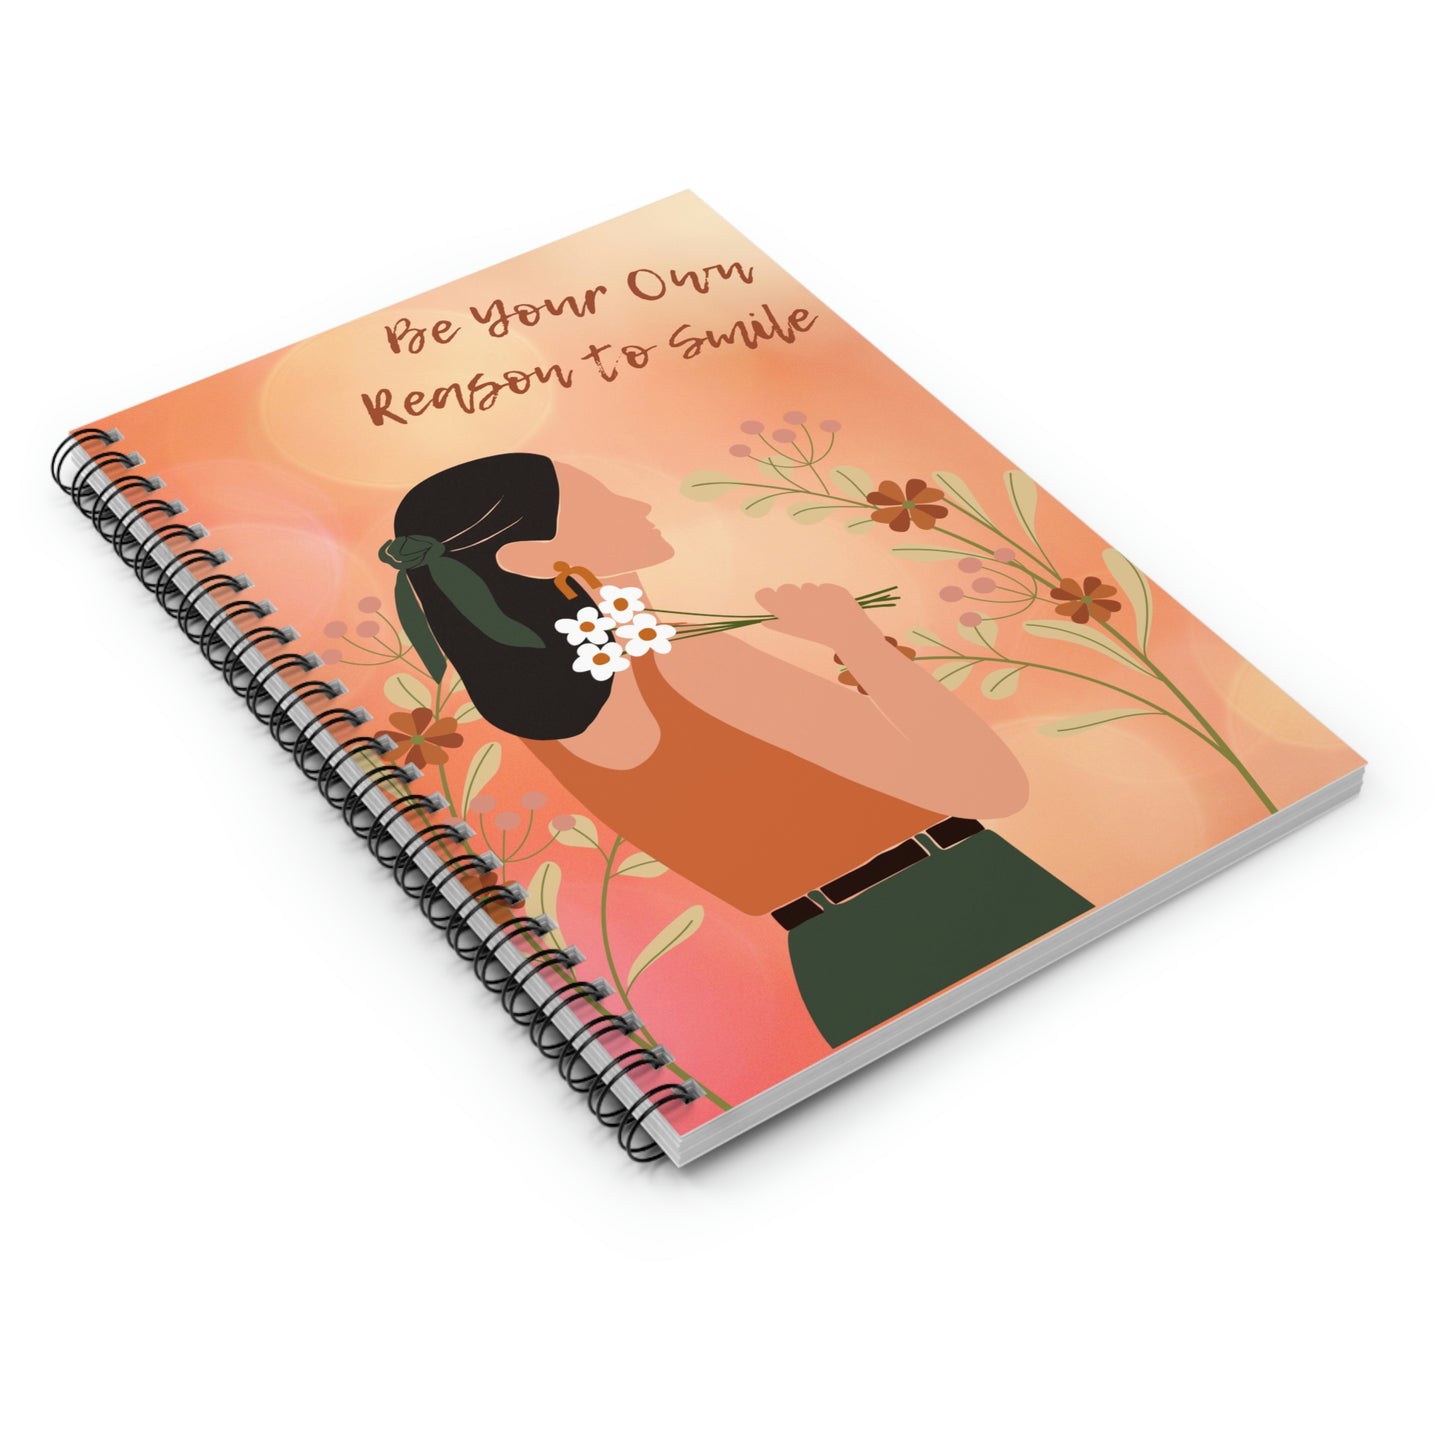 Be Your Own Reason 2 Spiral Notebook/Journal